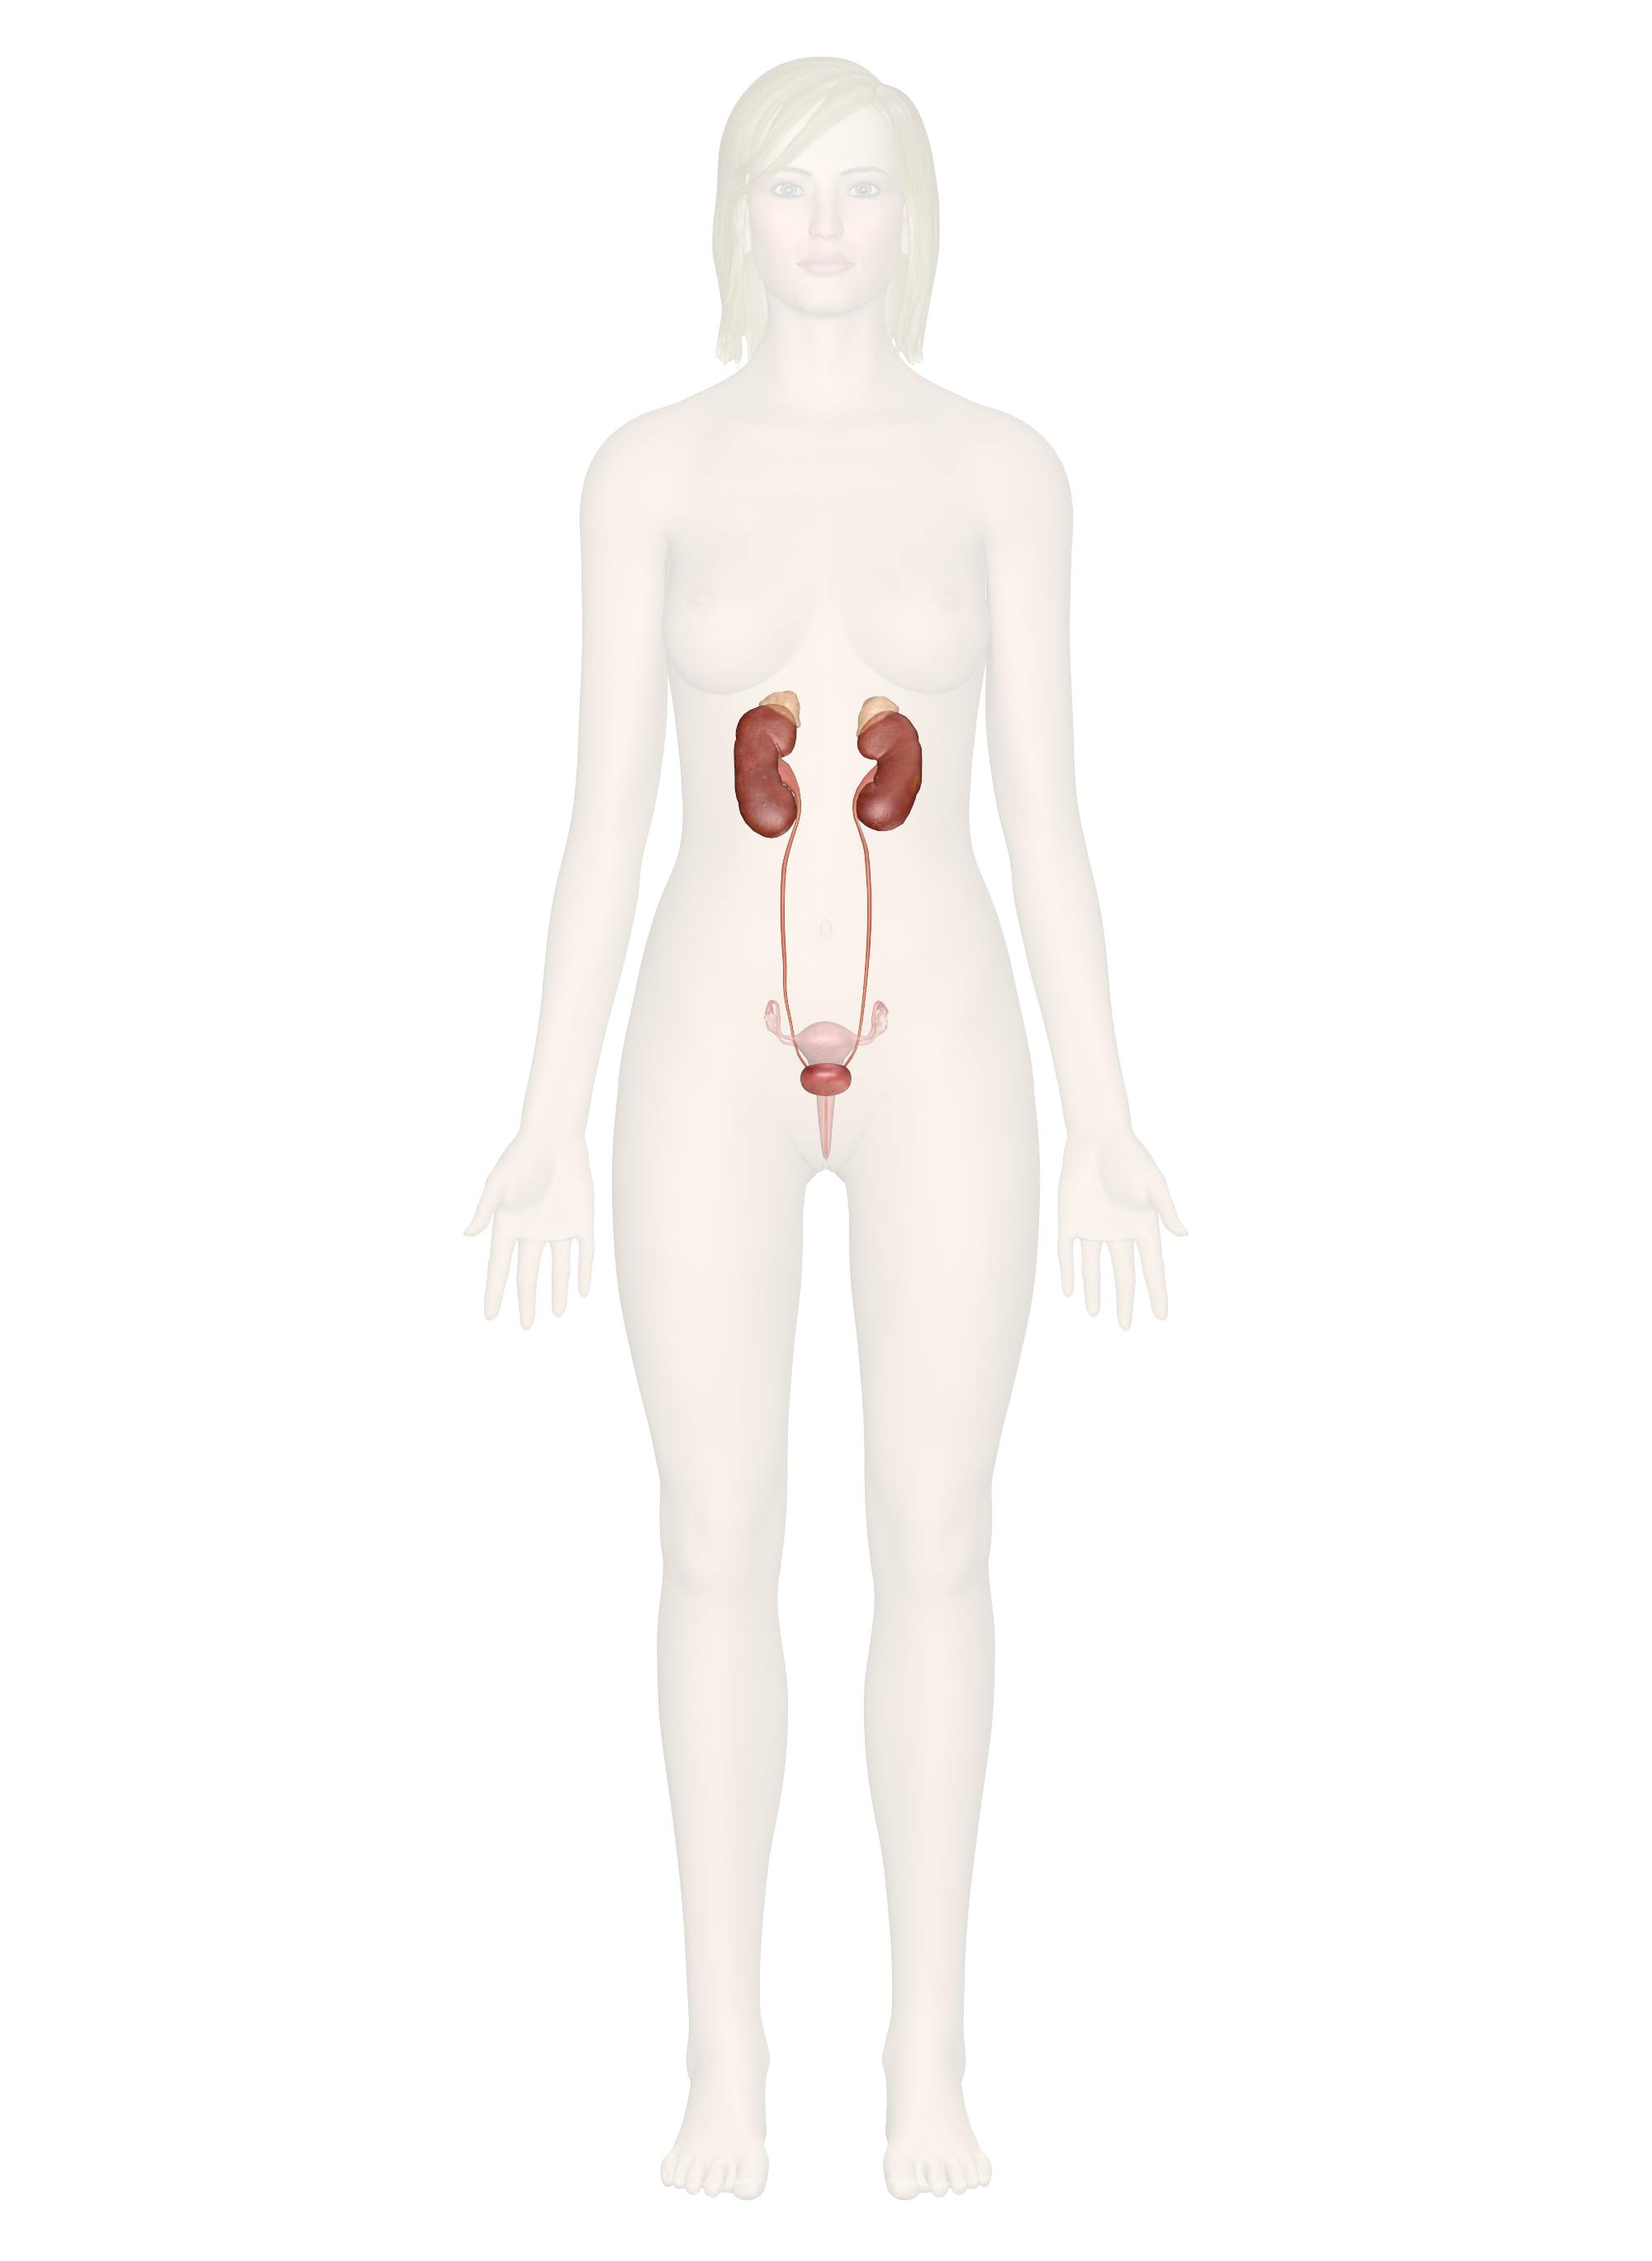 Interactive Guide to the Urinary System